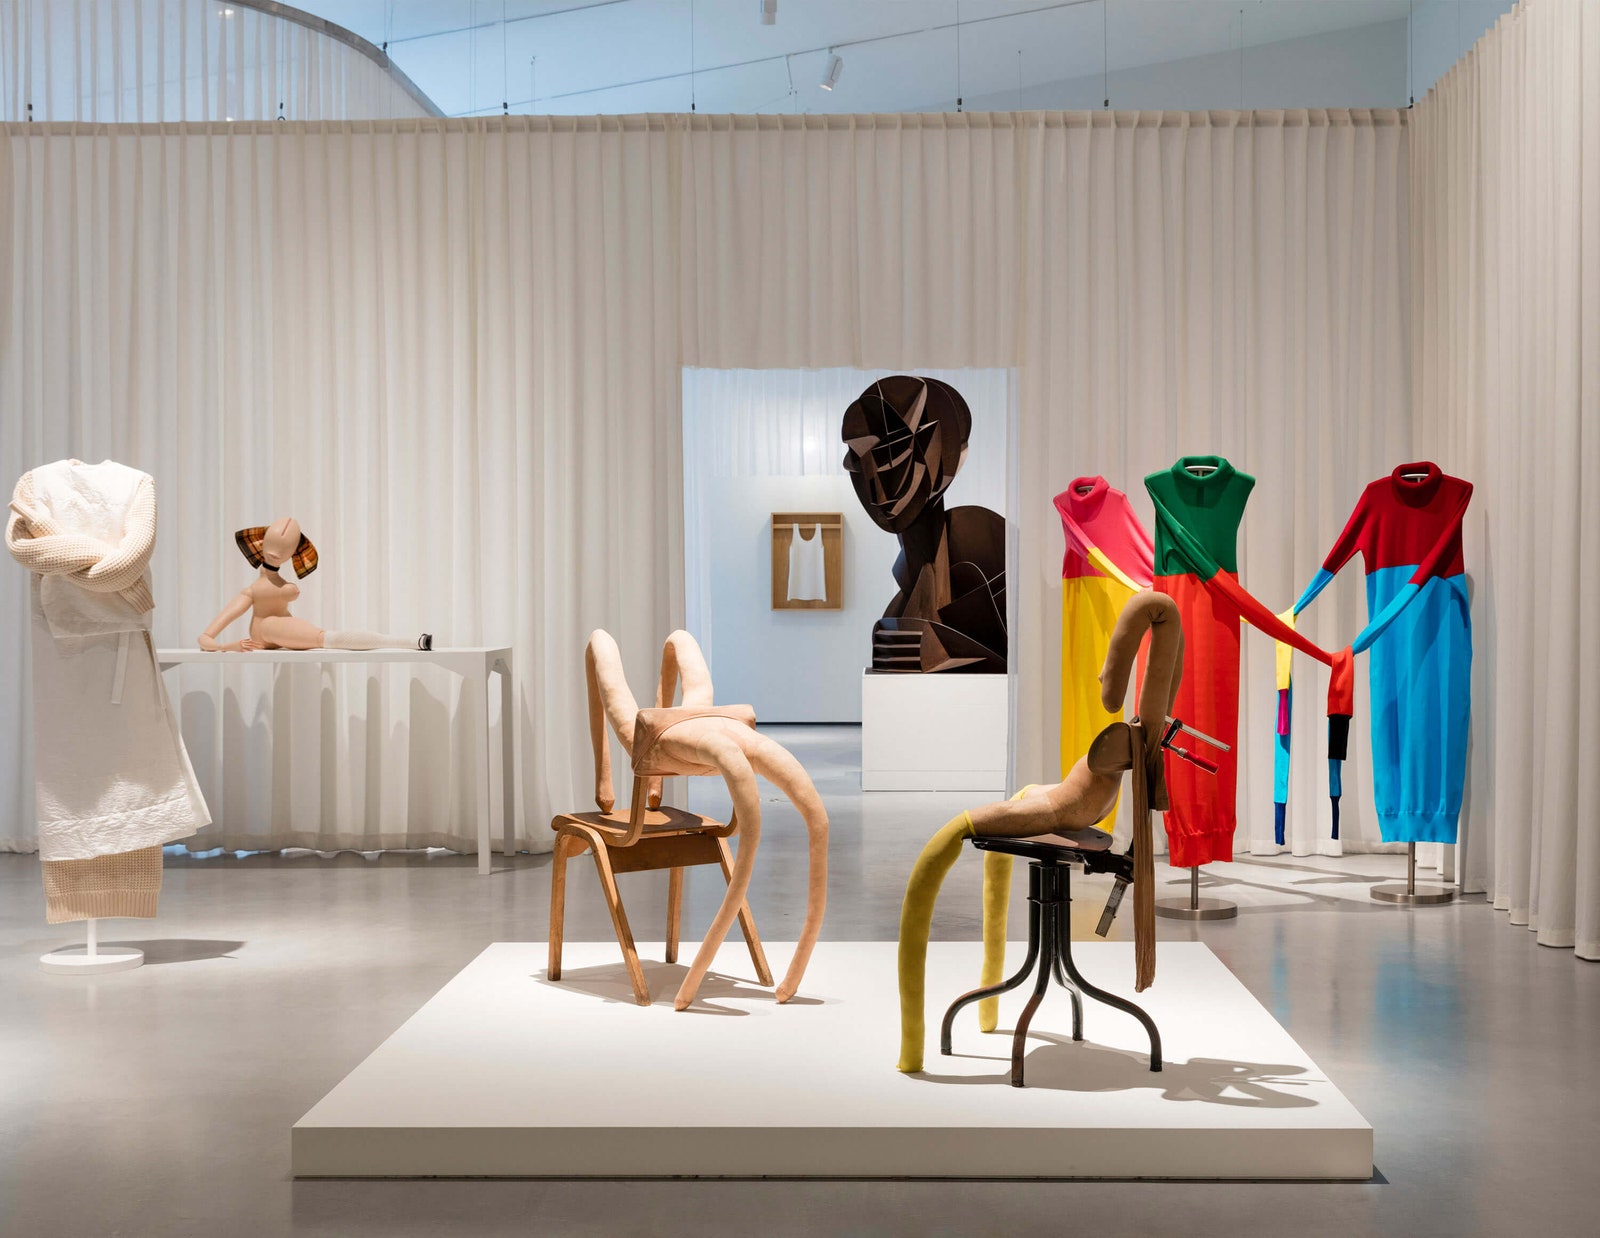 The Disobedient Bodies exhibition at the Hepworth Wakefield gallery in West Yorkshire in 2017 curated by JW Anderson.